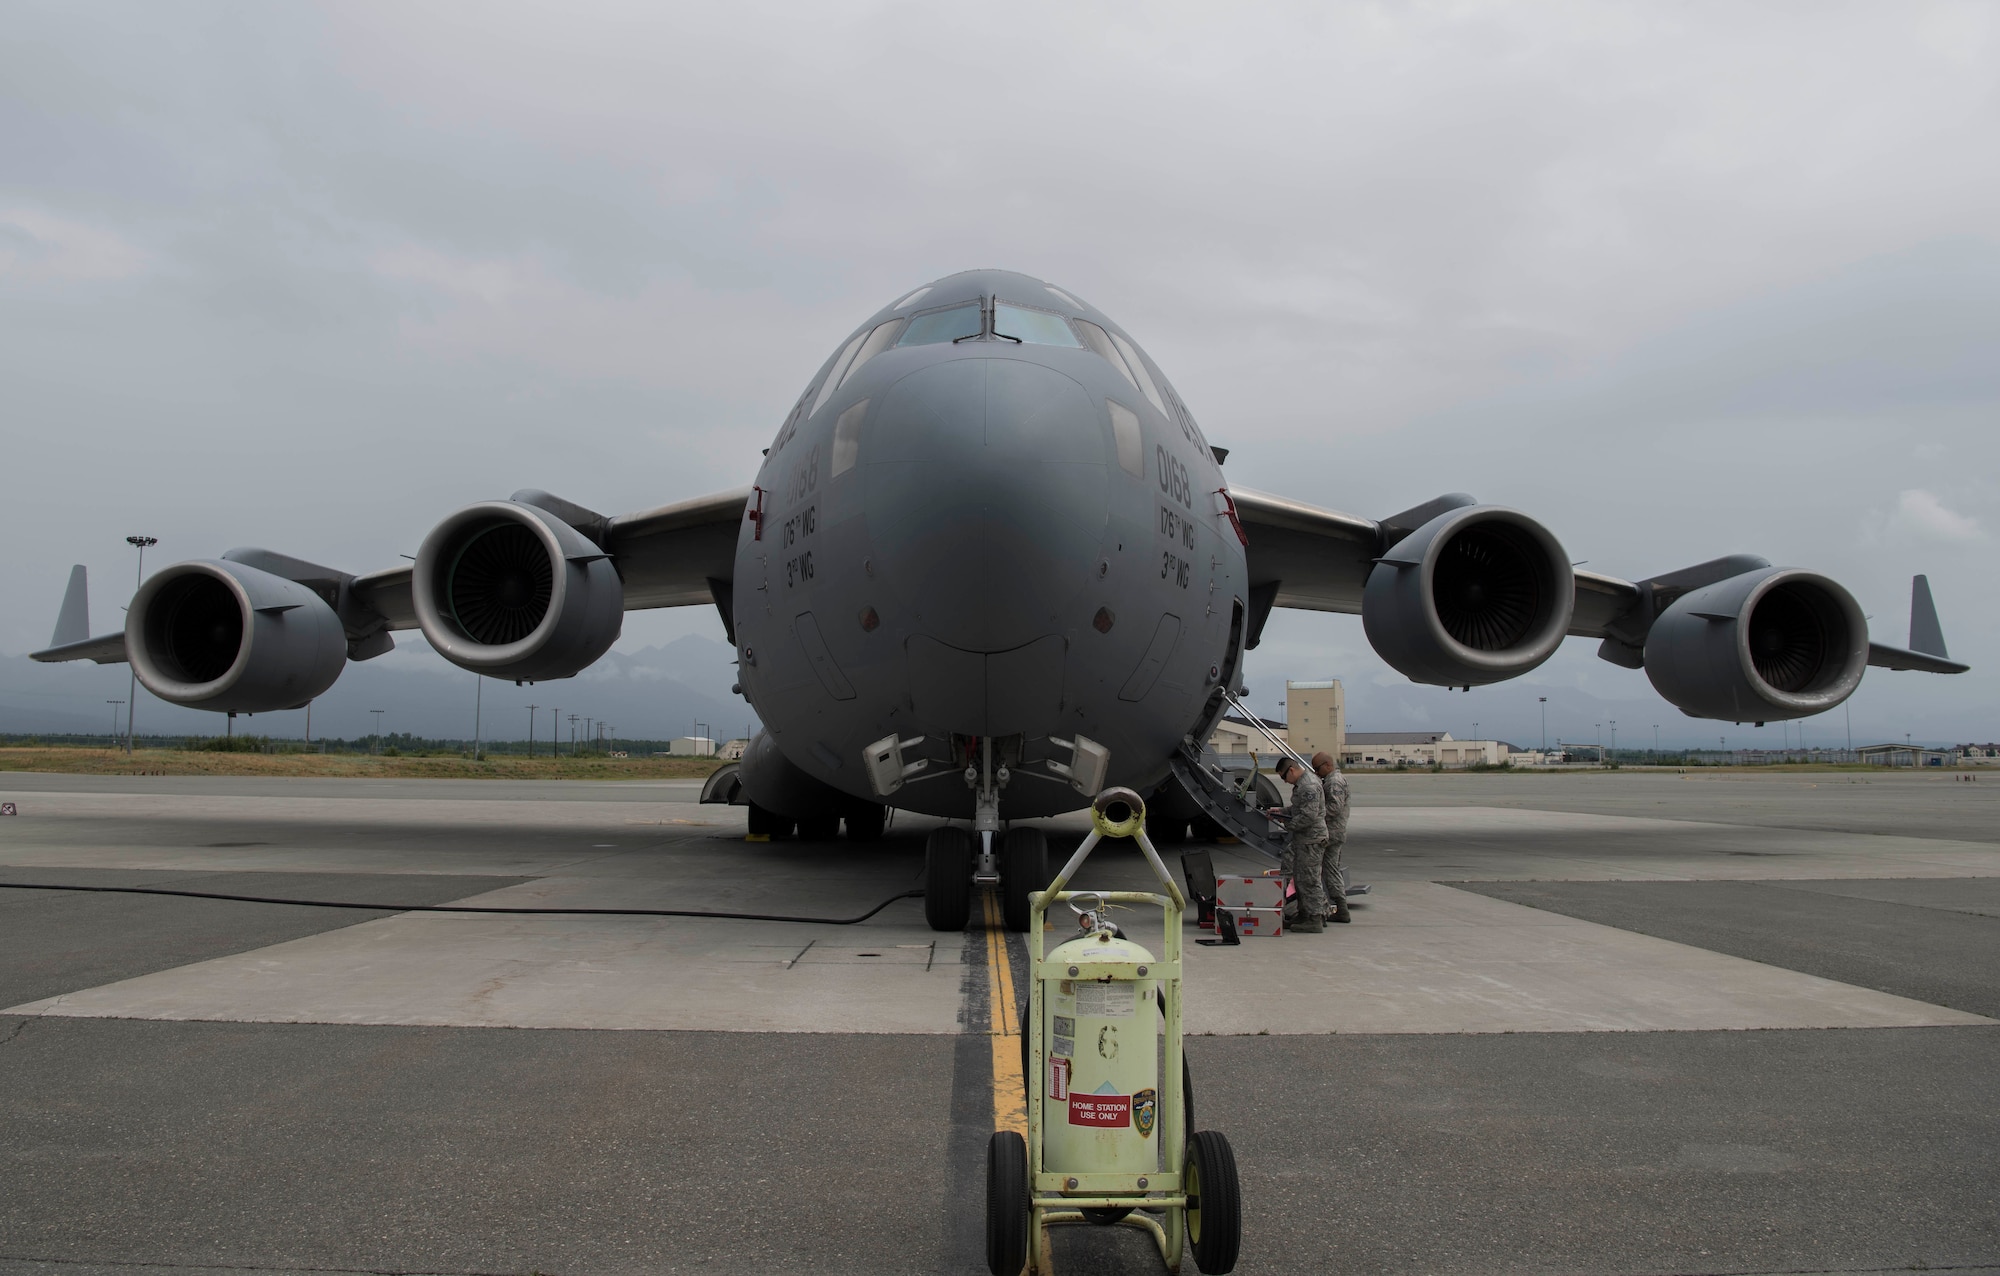 U.S. Air Force Staff Sgt. Silvestre Rojas and Senior Airman Michael Ela, both 517th Aircraft Maintenance Unit communication navigations specialists, load flare magazines onto a C-17 Globemaster III at Joint Base Elmendorf-Richardson, Alaska, July 26, 2018. During this process, the aircraft is cordoned off and the specialists test the flare dispensers for functionality.